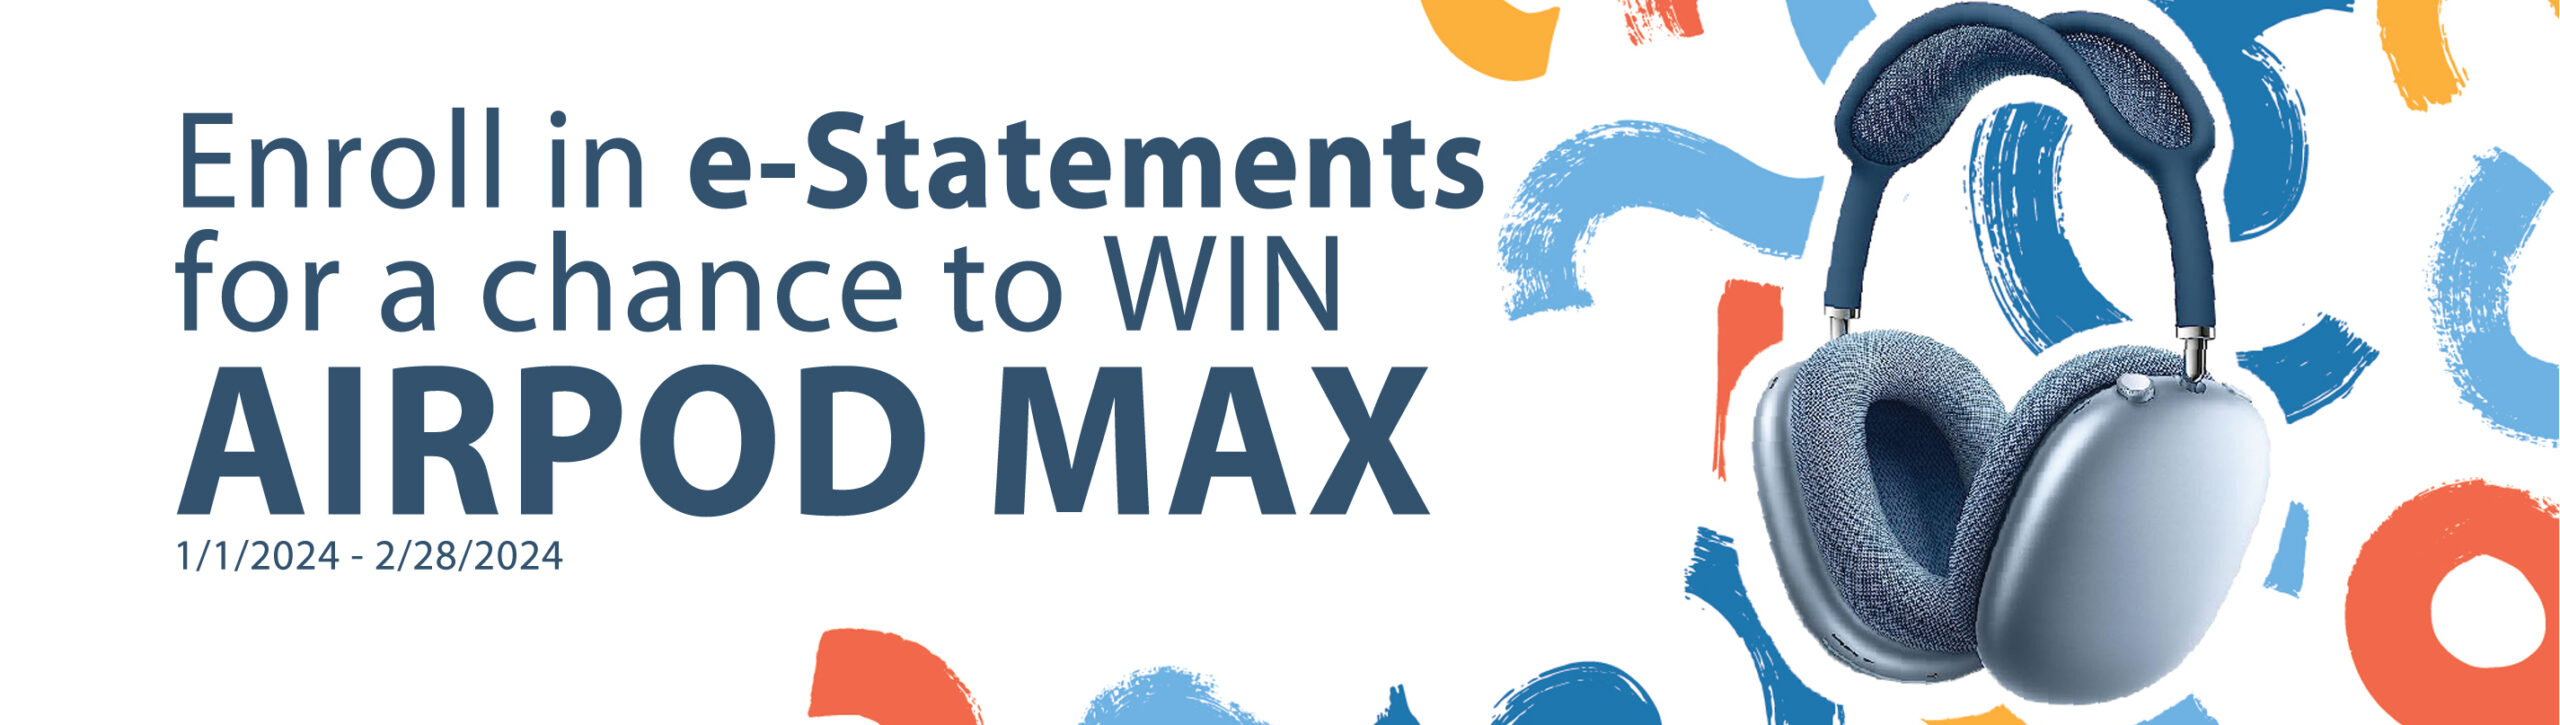 enroll in e-statements for a chance to win airpod max 1/1/24 - 2/28/24